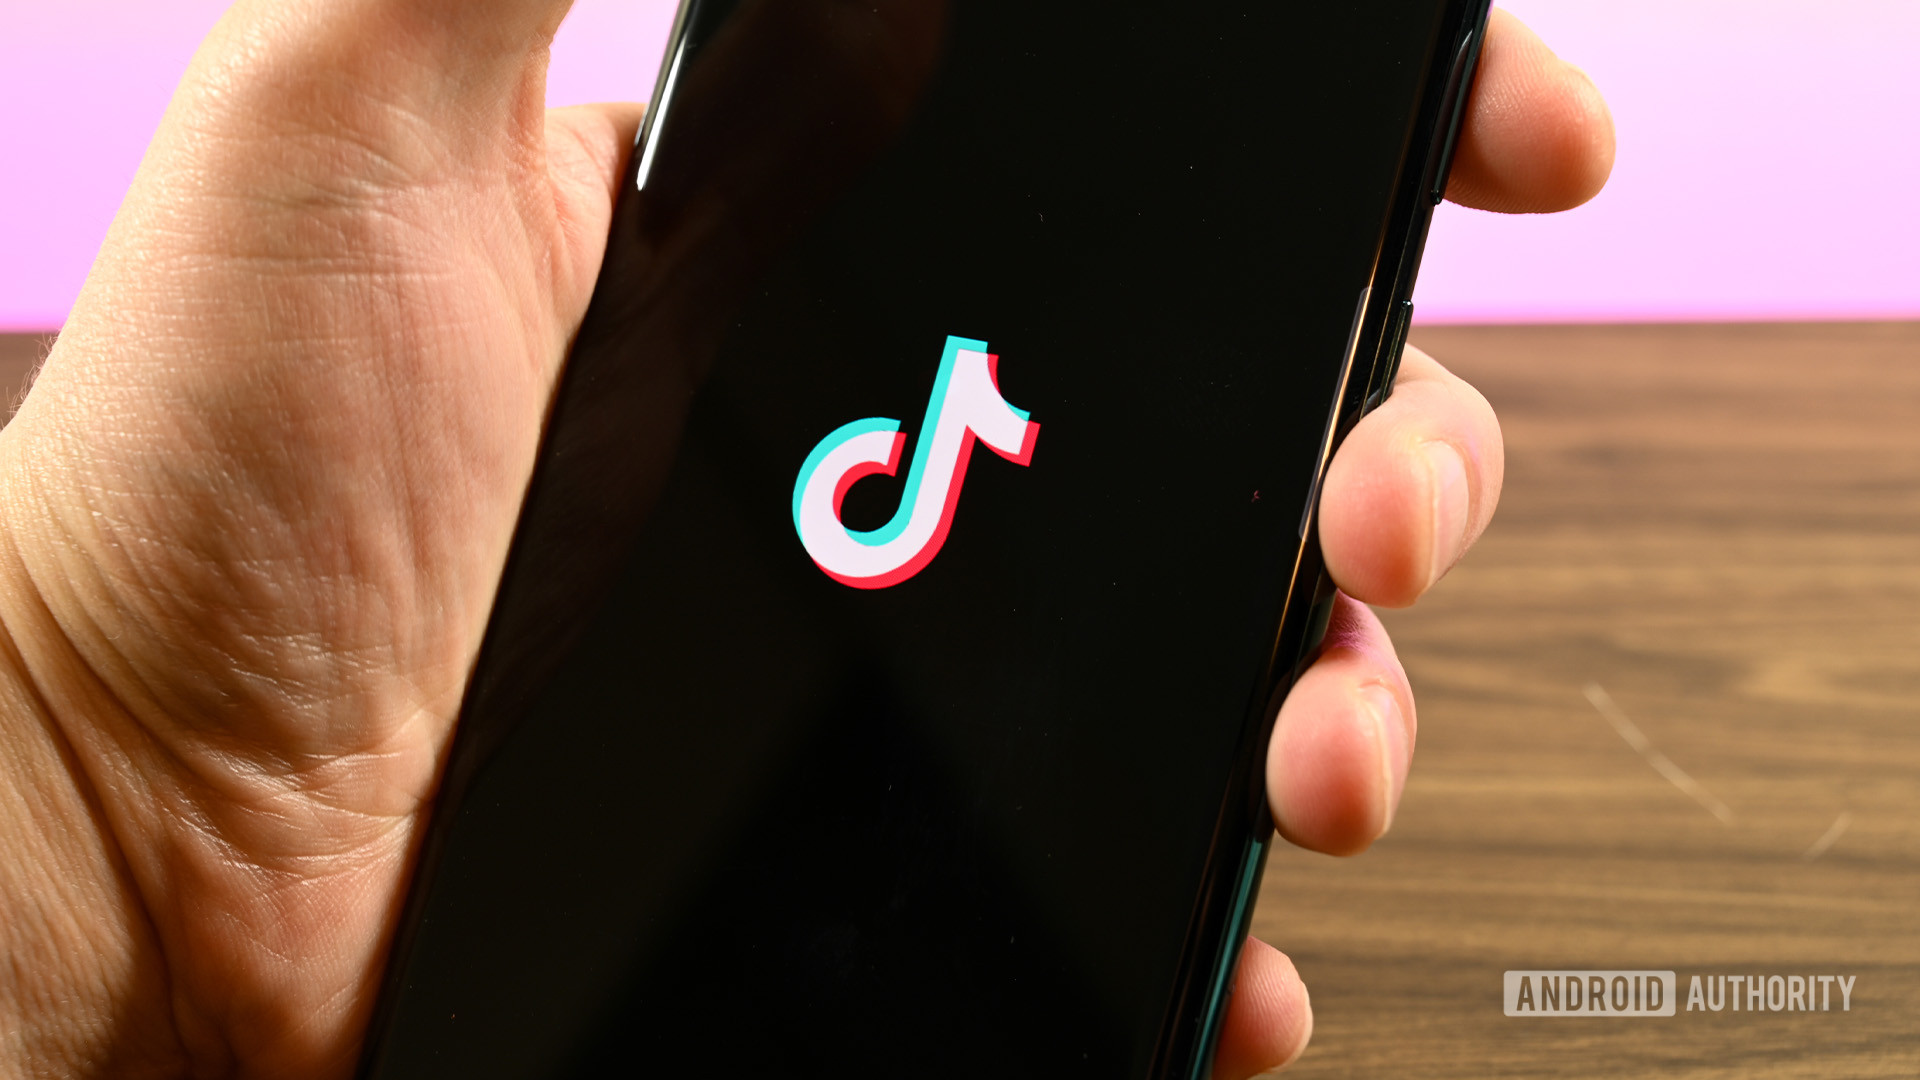 TikTok Music could get a lossless audio option as hinted by new app code